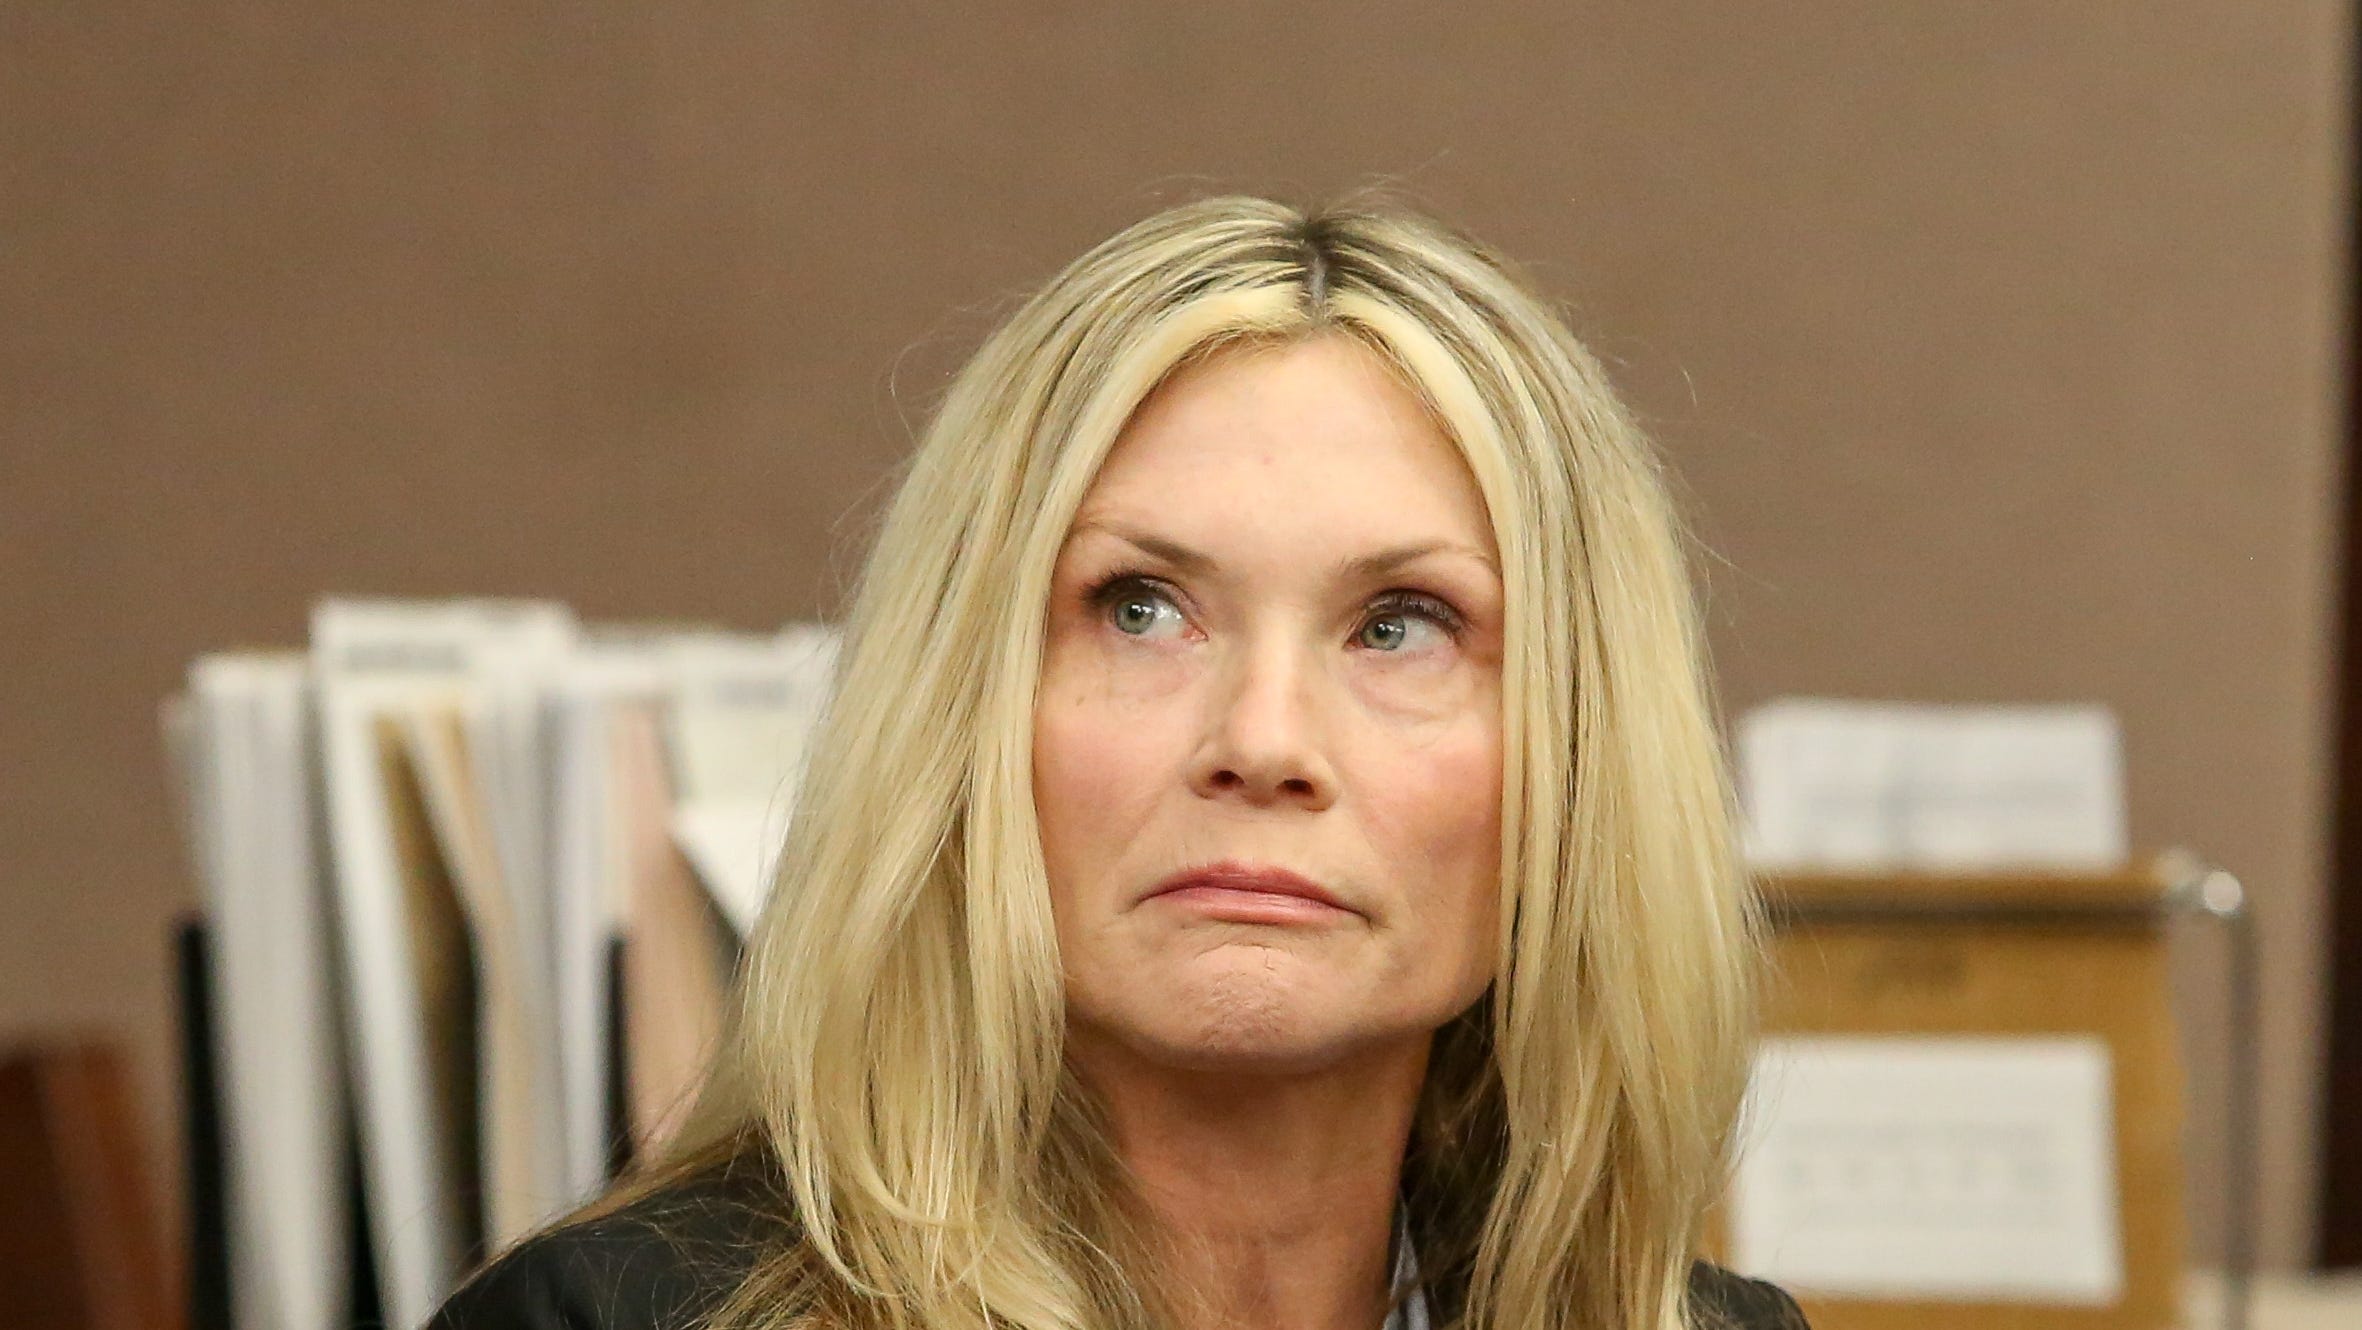 â€˜Melrose Placeâ€™ actress Amy Locane resentenced to 8 years in prison for fatal DWI crash - USA TODAY